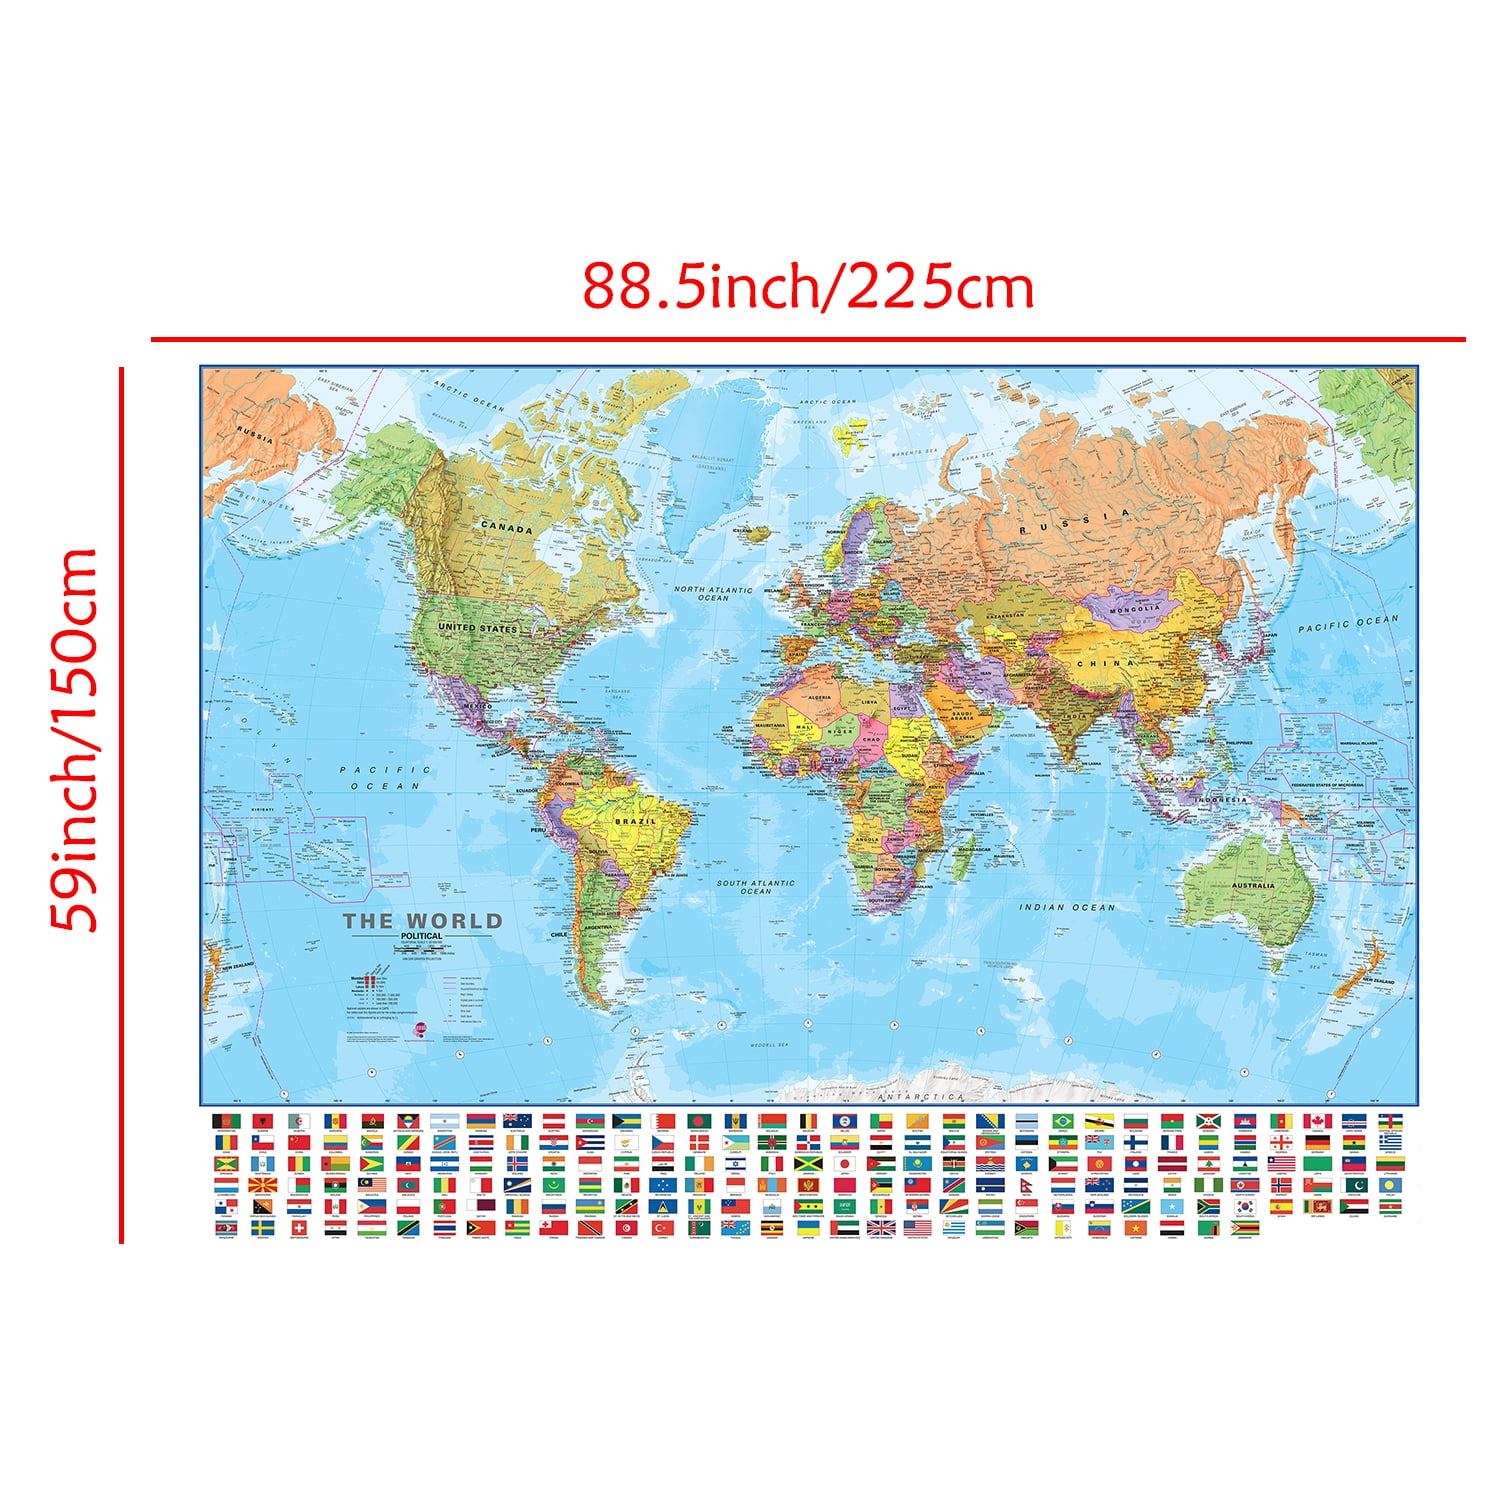 WORLD MAP FLAGS AND FACTS MAP OF THE WORLD GPP51070  GIANT  POSTER 140cm x 100 